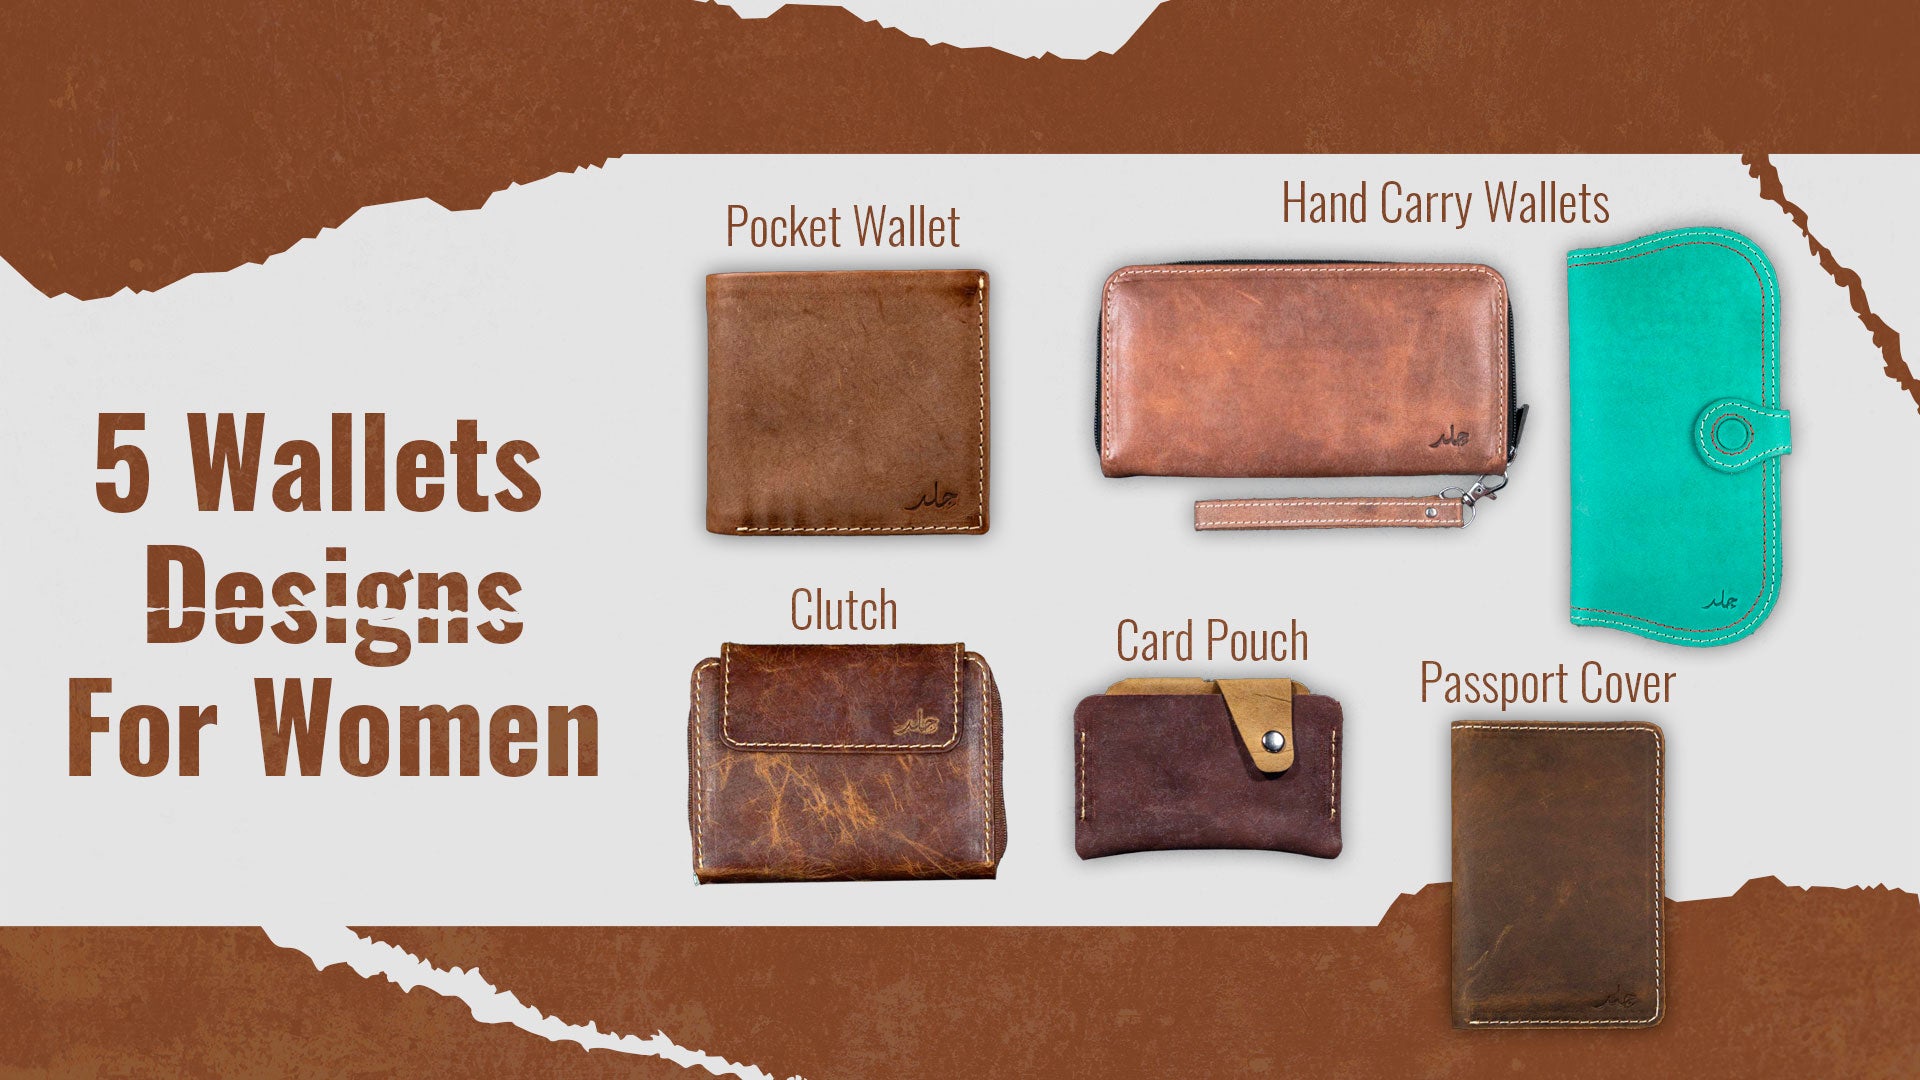 5 Stylish Types of Wallets for Women for Everyday Use